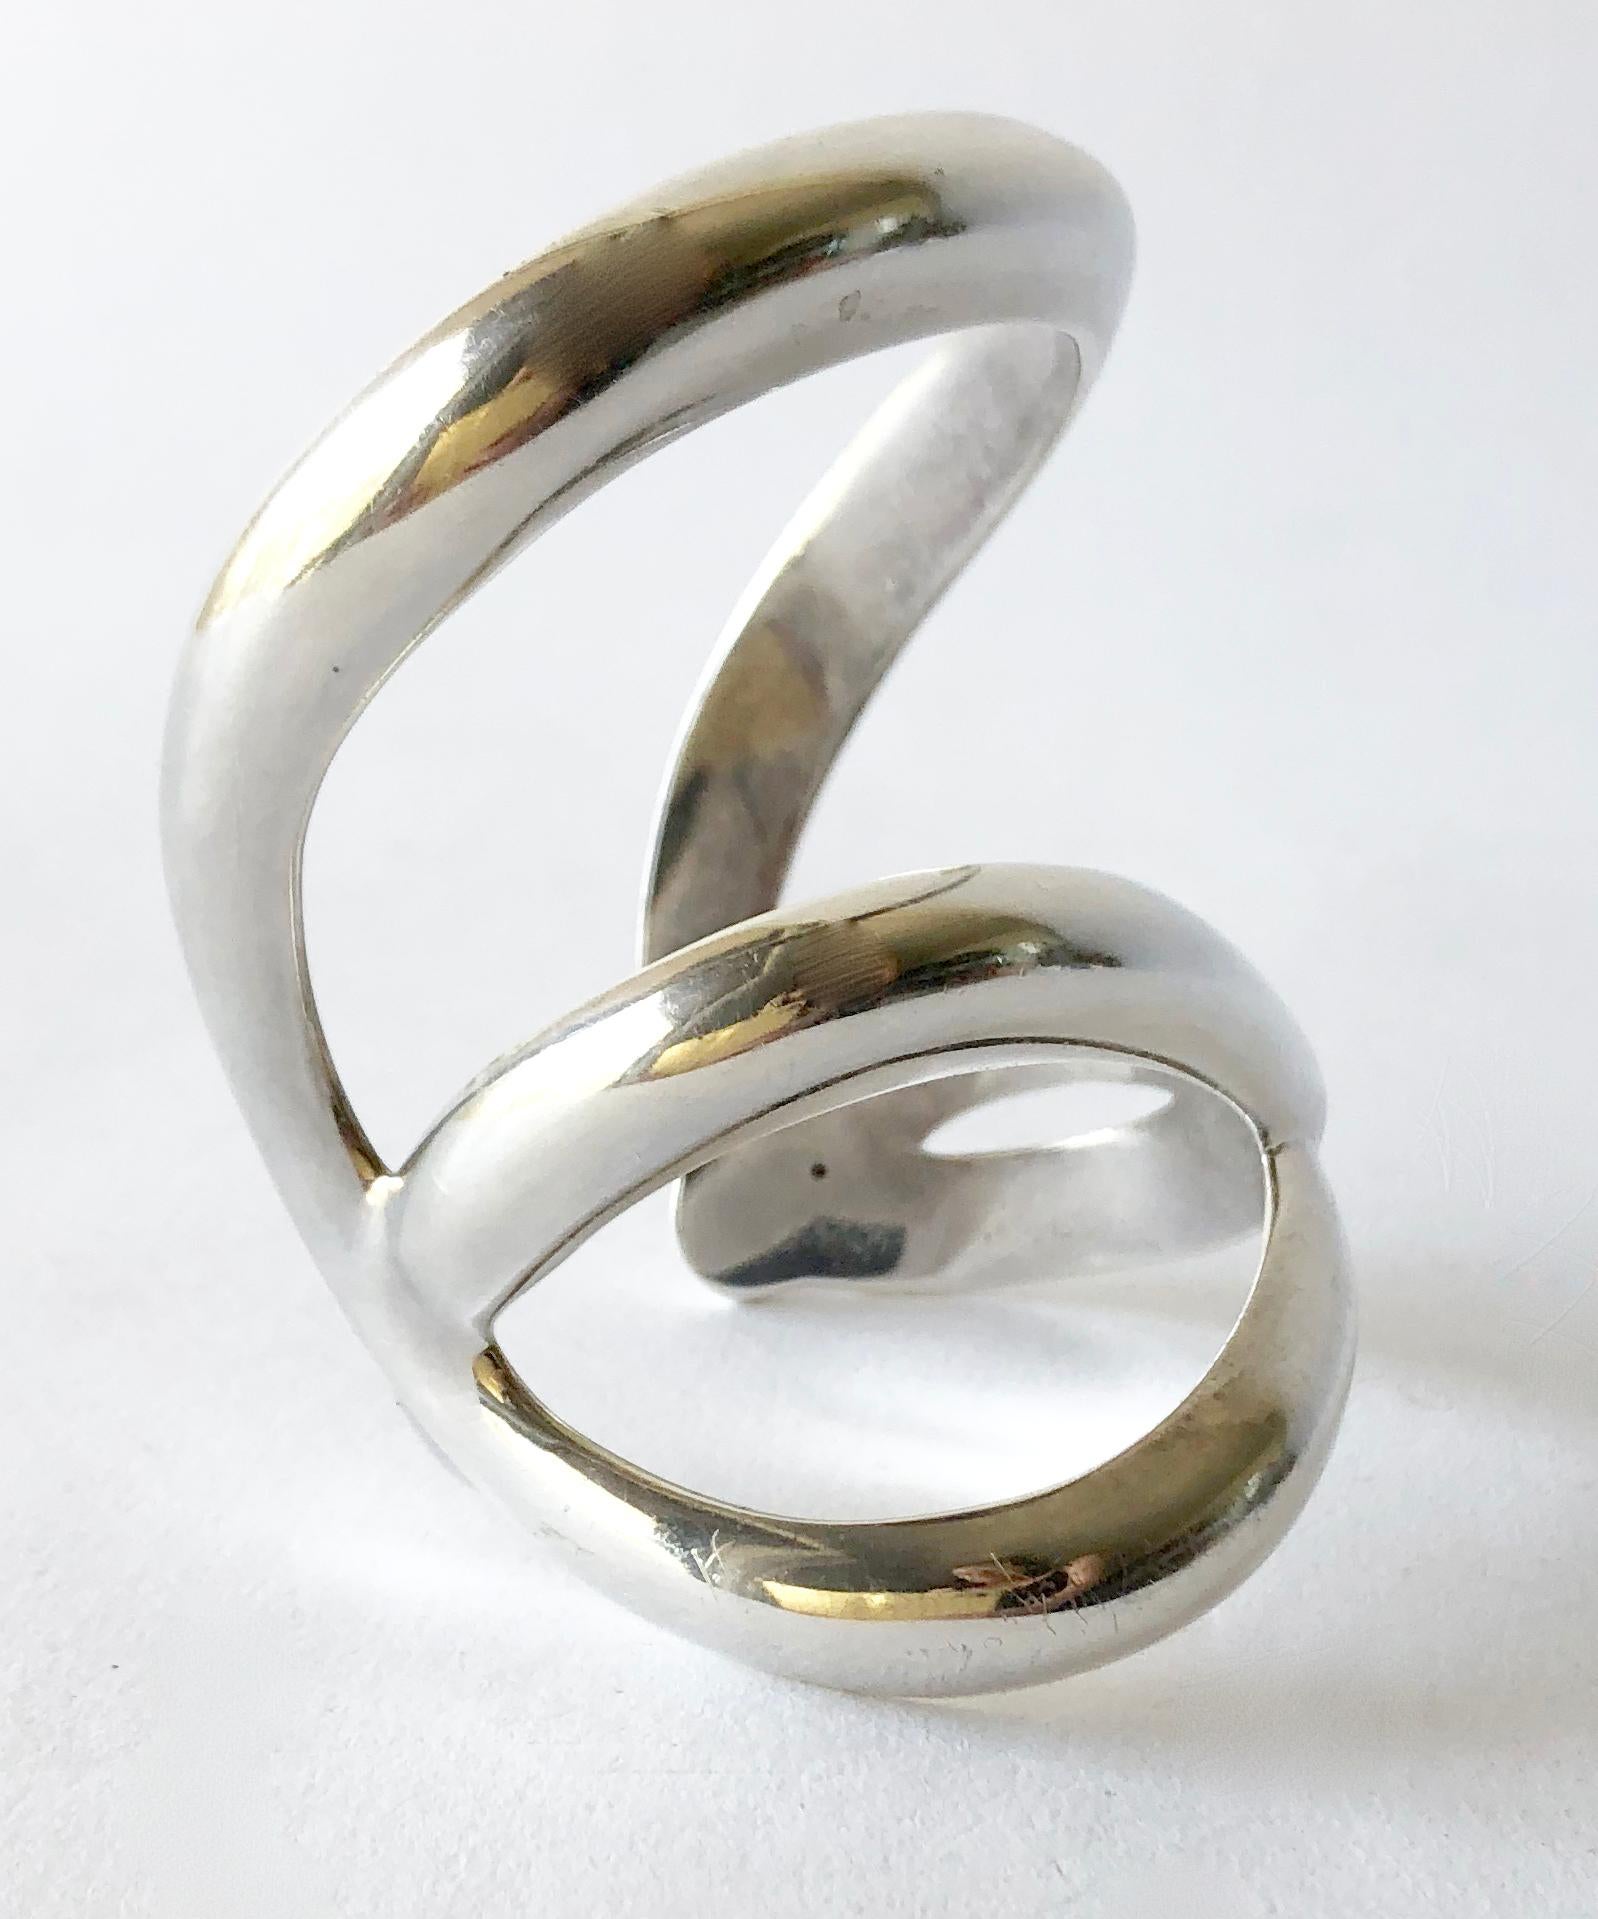 Super wide cuff bracelet of solid sterling silver created by Angela Cummings circa 1984.  Cuff measures 2 2/4